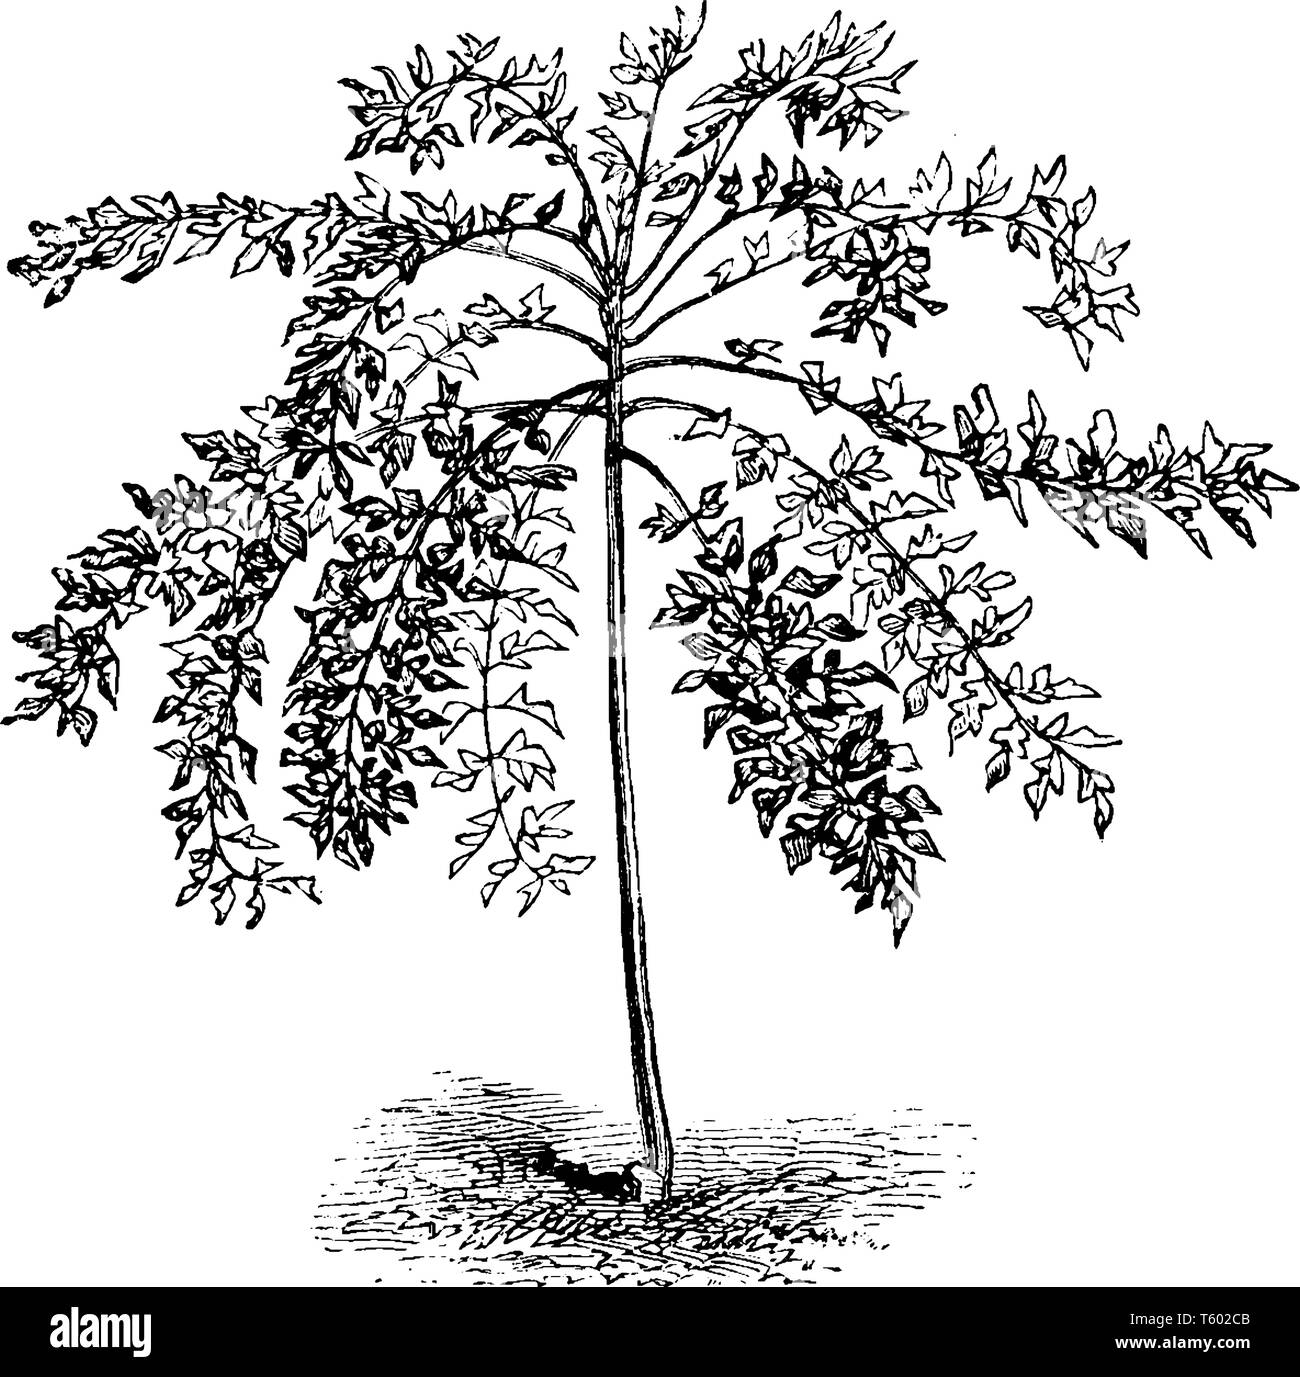 A picture showing a Panax Murrayi. This is from Araliaceae family. A small to medium size tree, grows 25 meters tall. Leaves are larger oval shaped. S Stock Vector